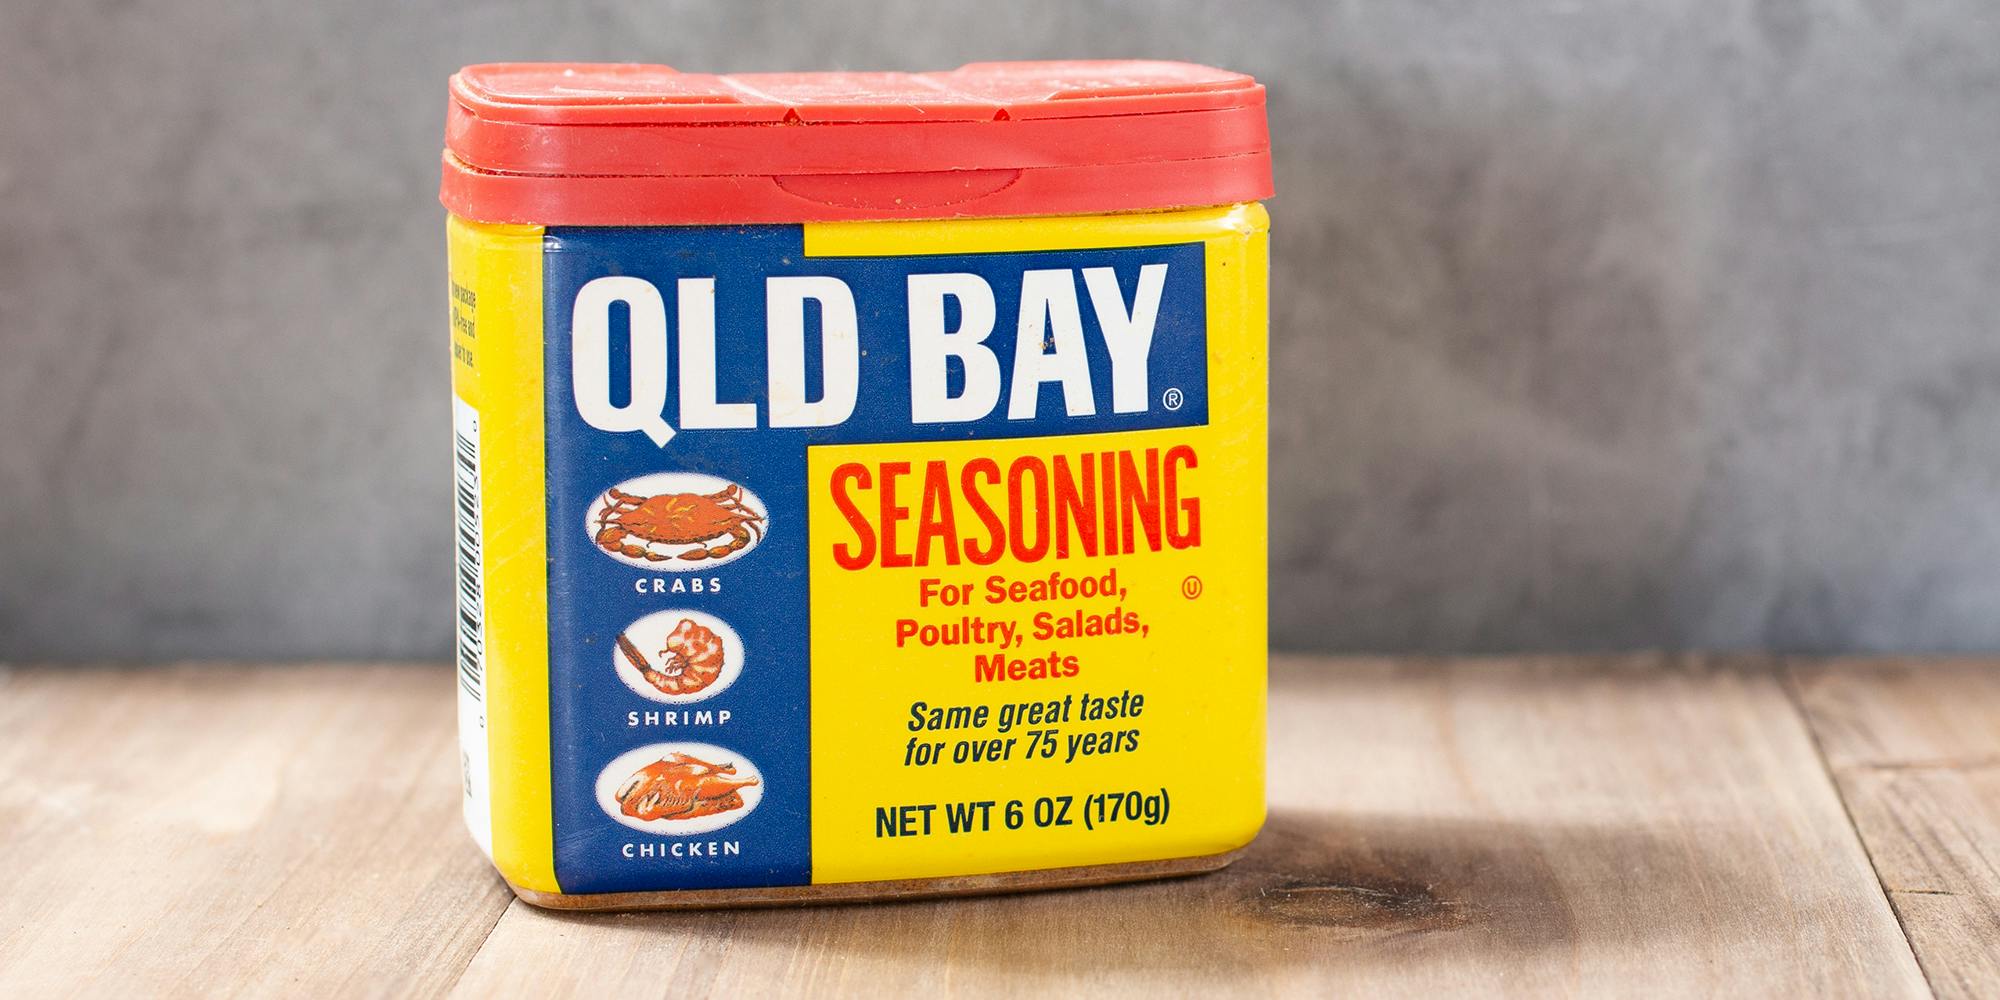 Old Bay seasoning with Q replacing O in "Old Bay"